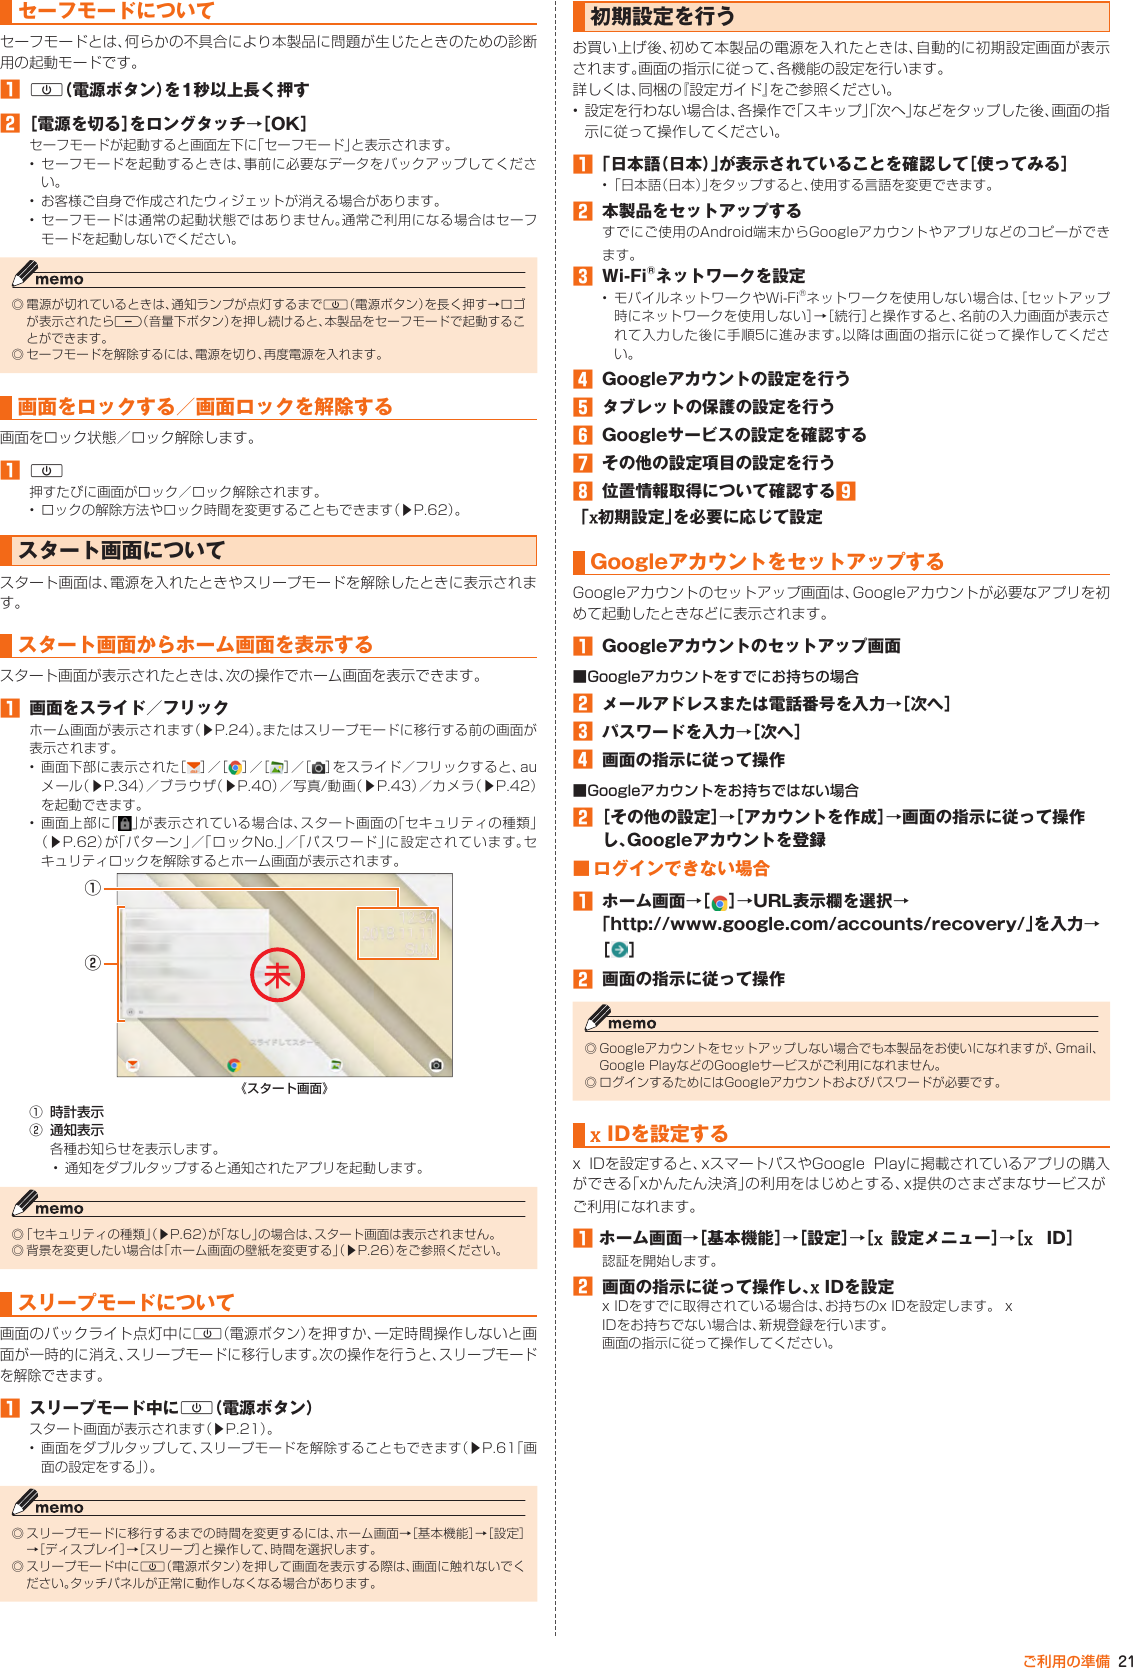 Page 22 of Kyocera FA85 Tablet User Manual 2